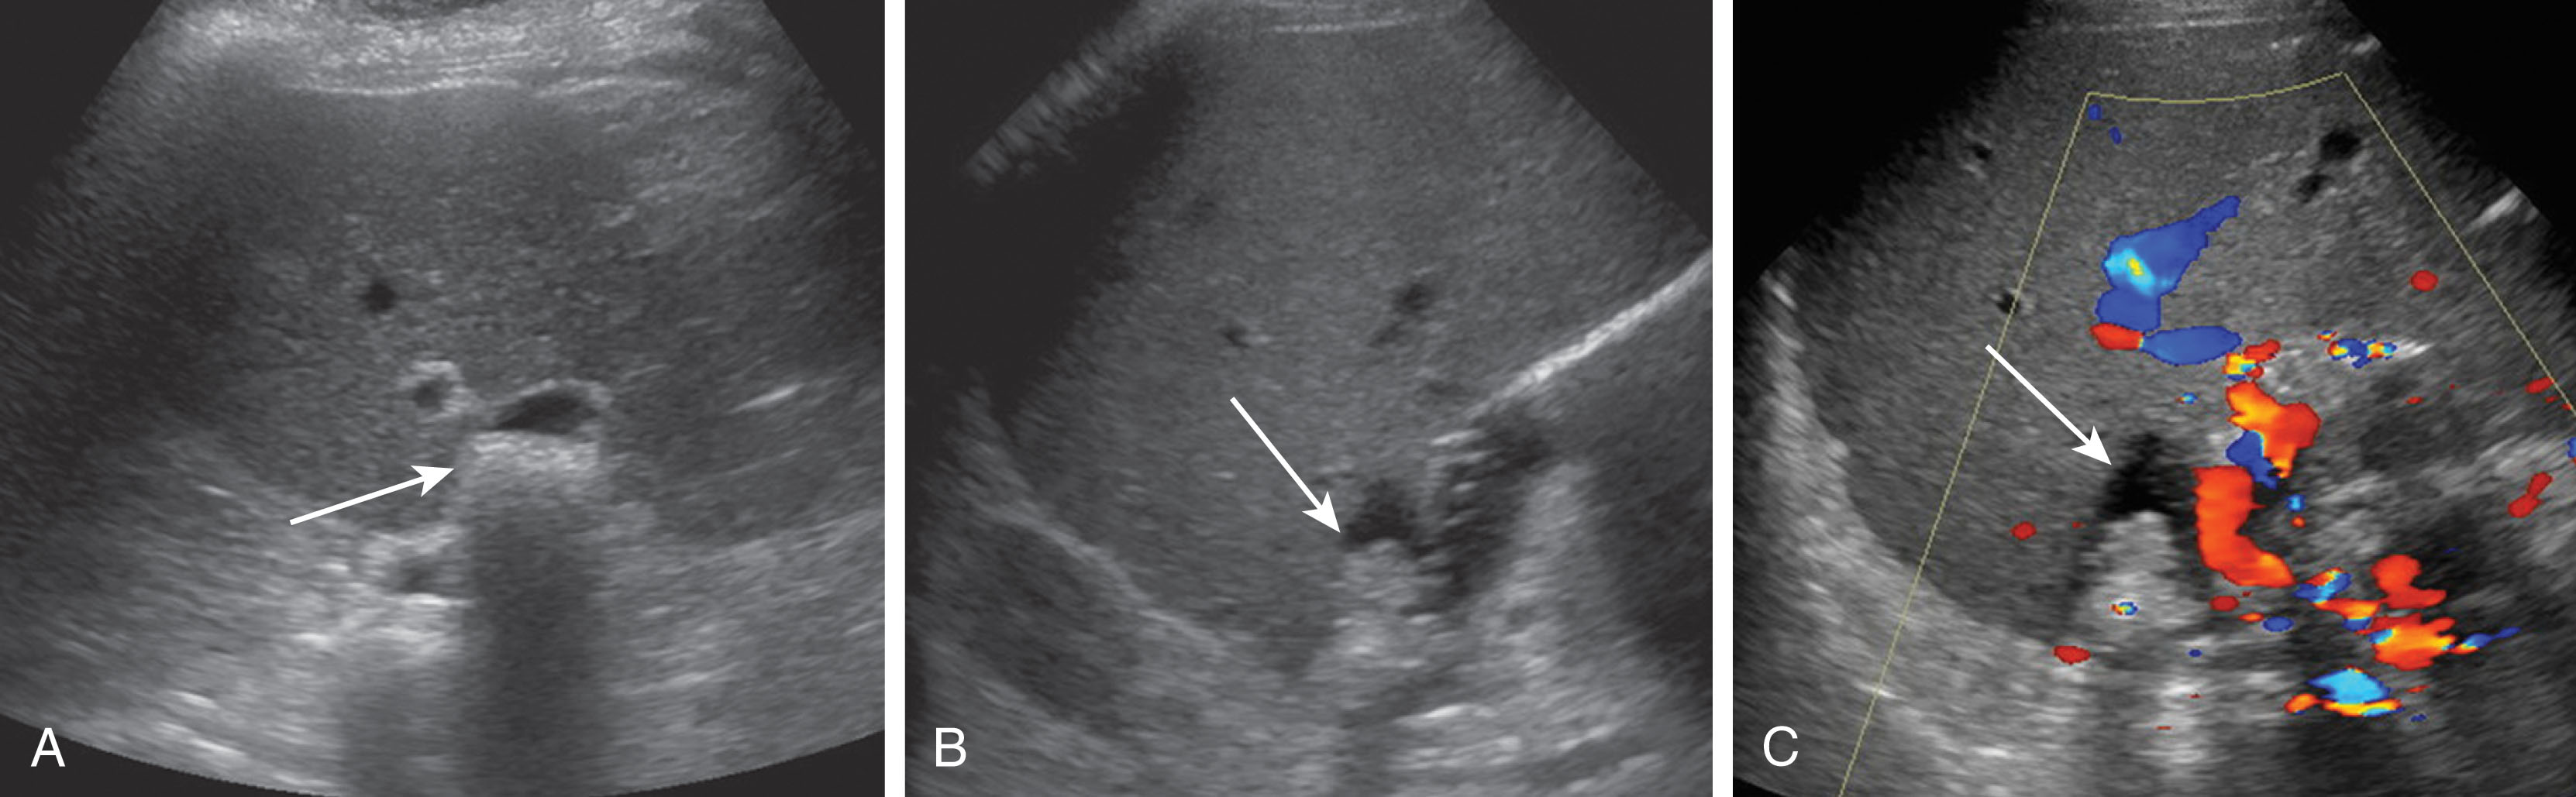 Fig. 20.20, Cystic duct remnant with stones and debris.